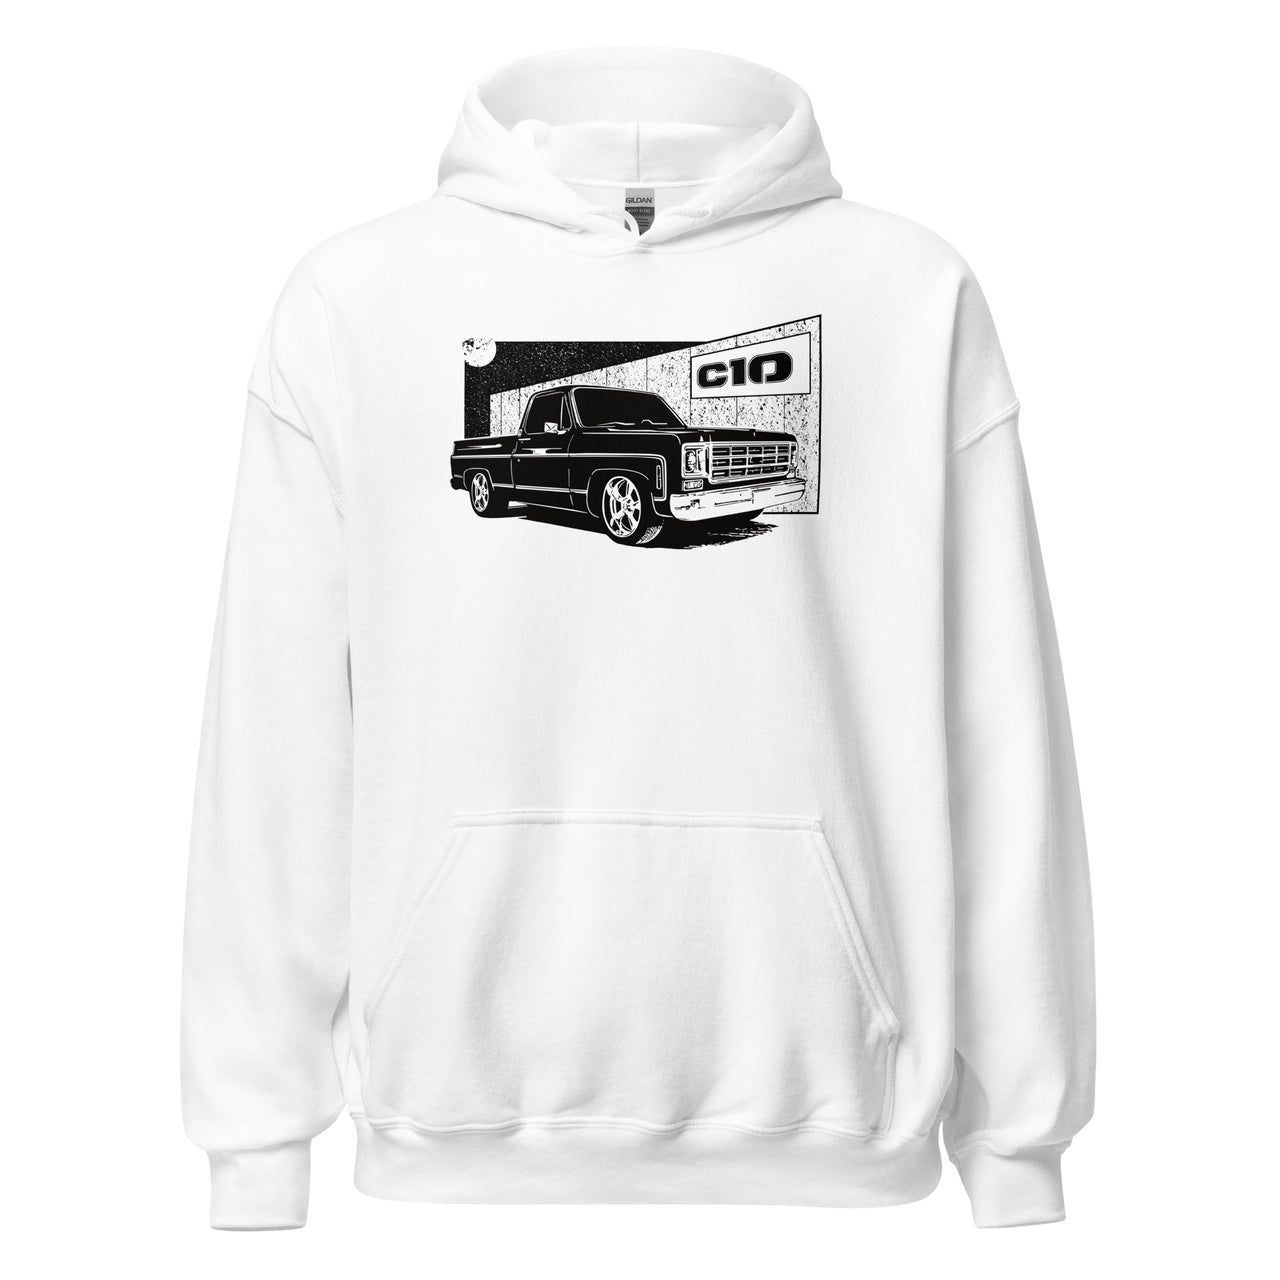 Square Body C10 Hoodie in white